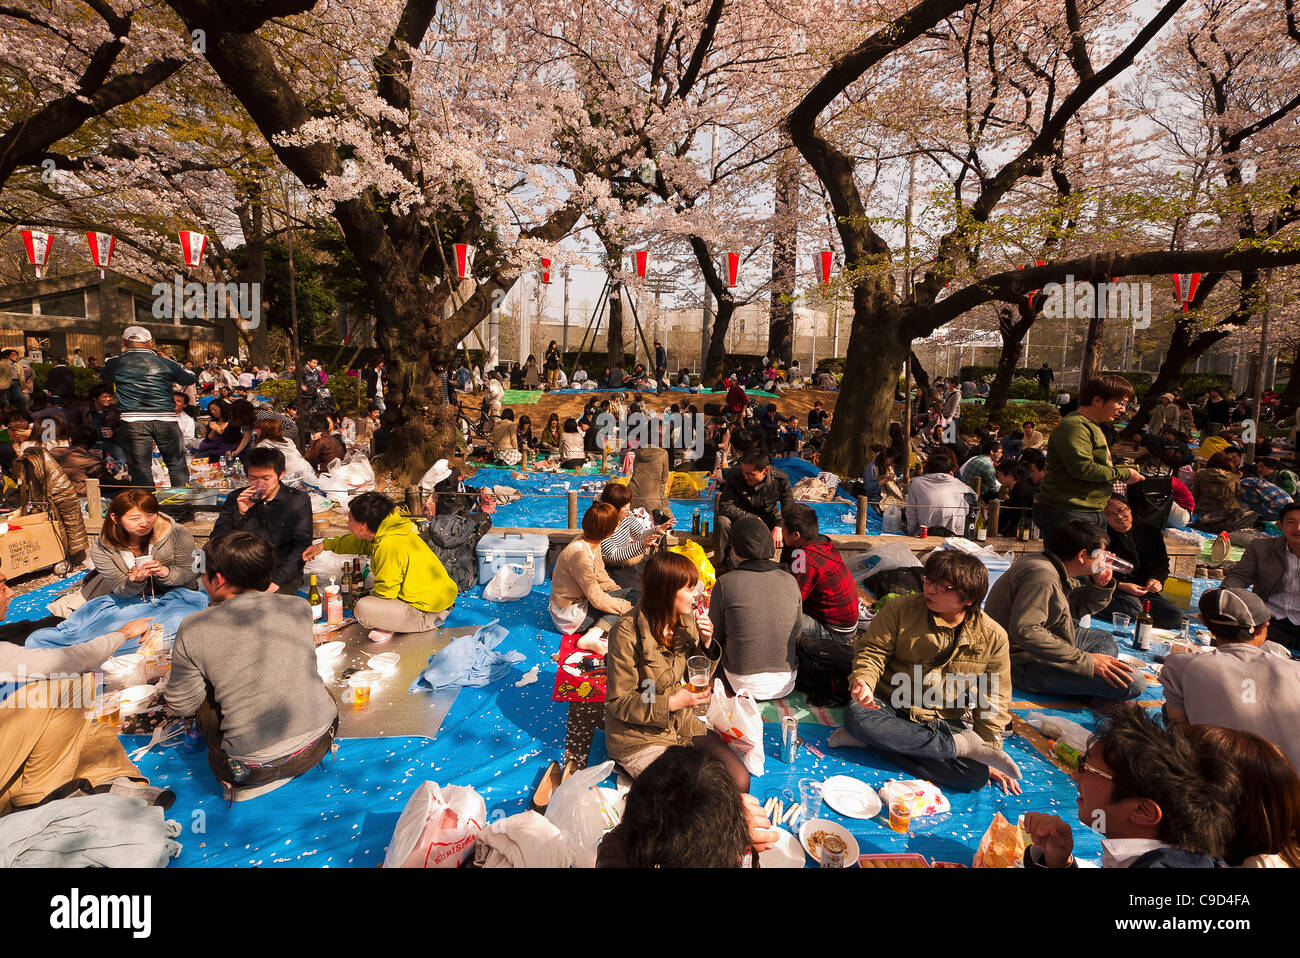 Japan, Tokyo, Ueno Park, Hanami cherry blossom viewing parties under cherry trees in full blossom Stock Photo